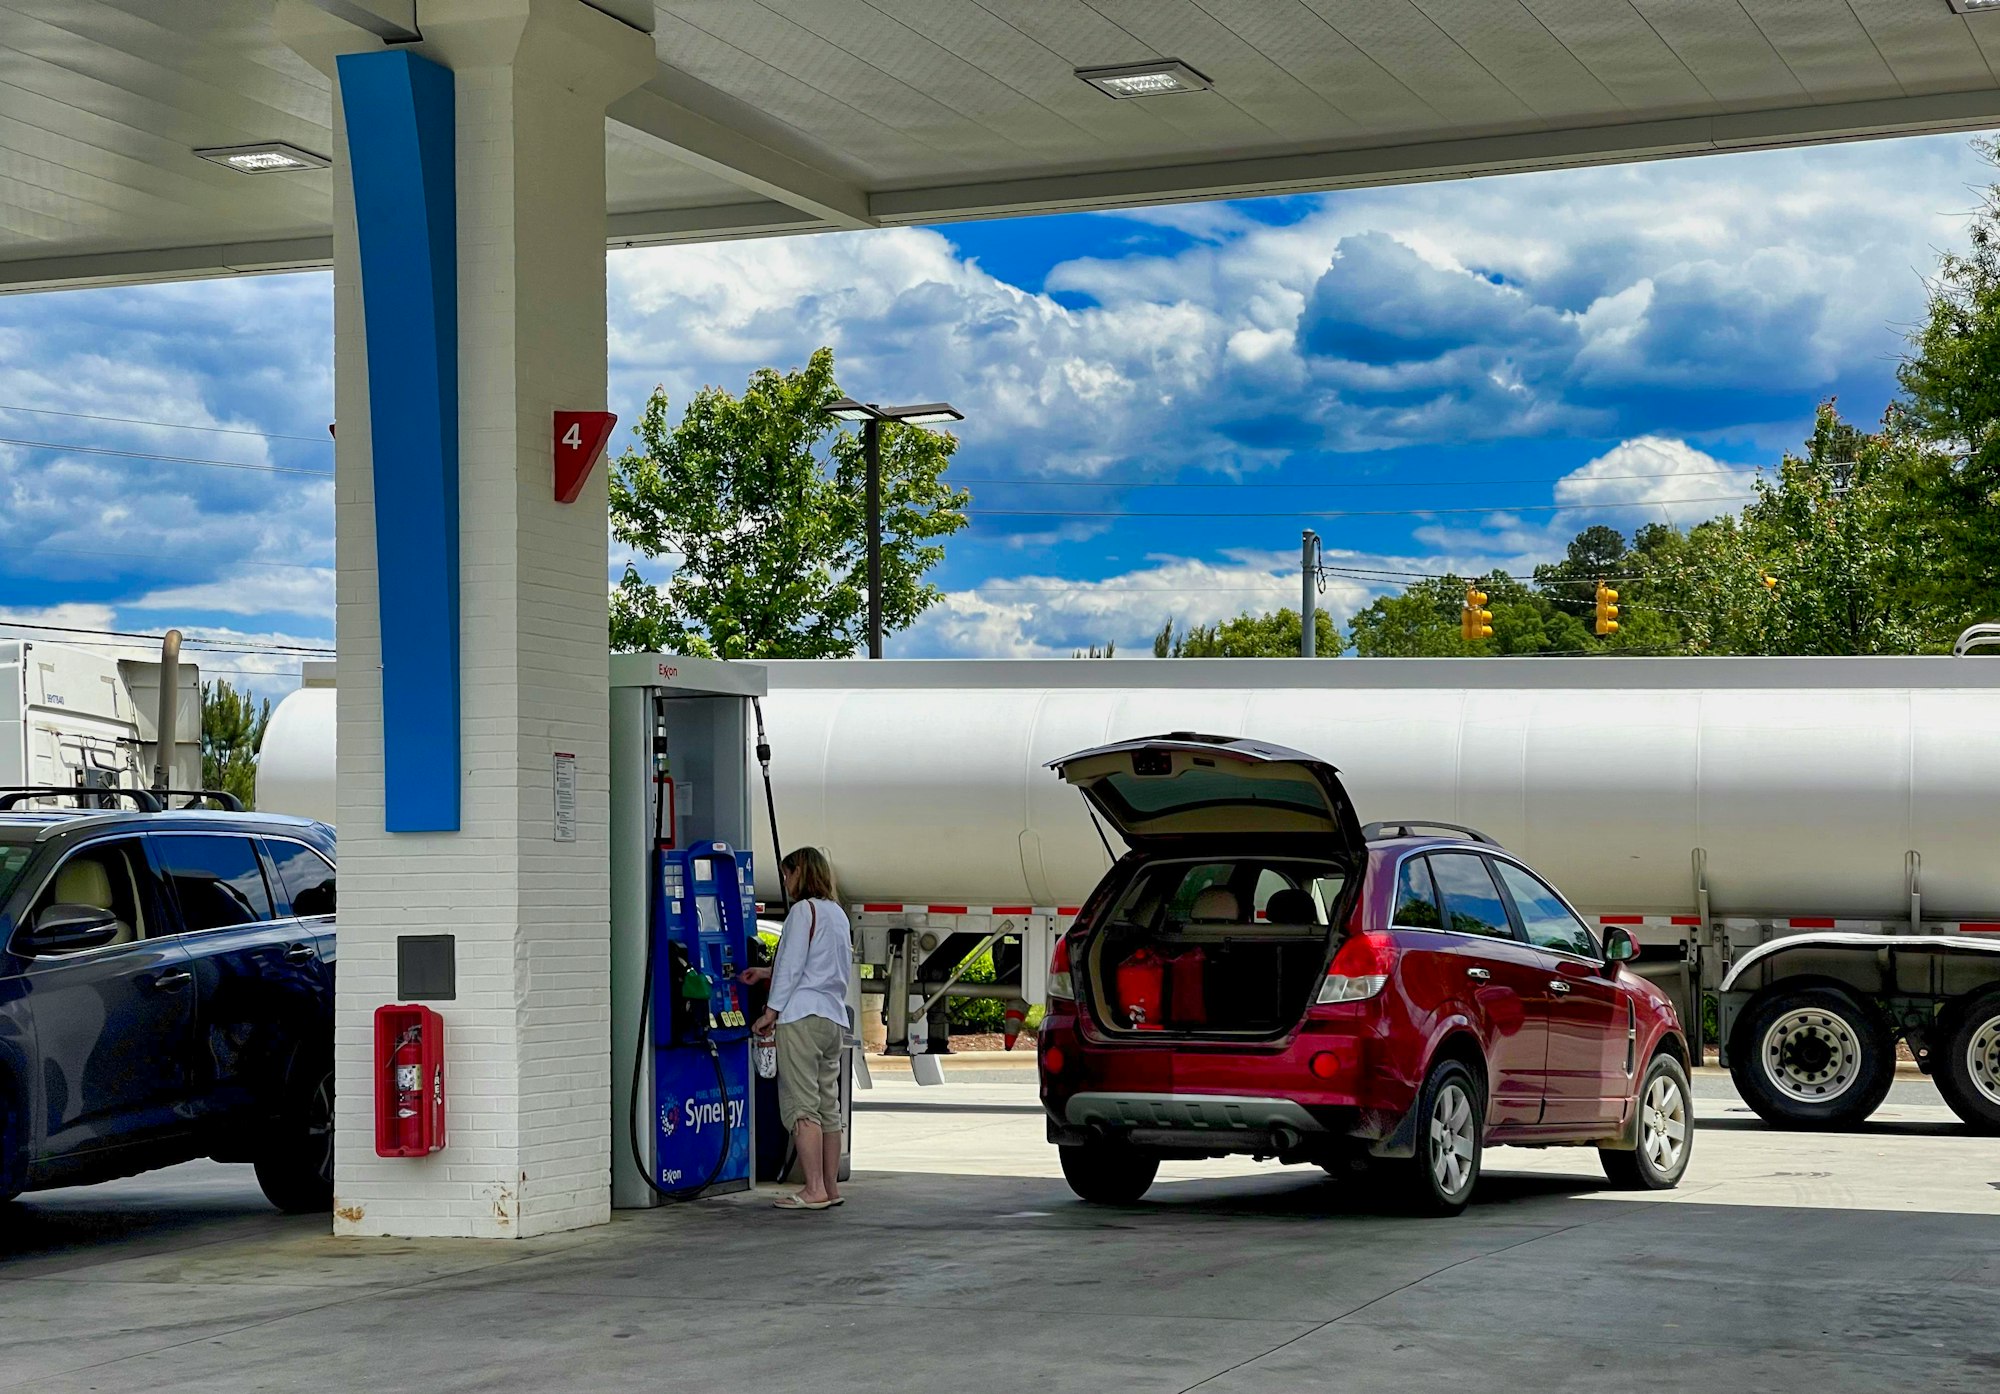 Woman pumps gas while an oil truck brings gas to refill tanks at a gas station in Pittsboro, North Carolina.